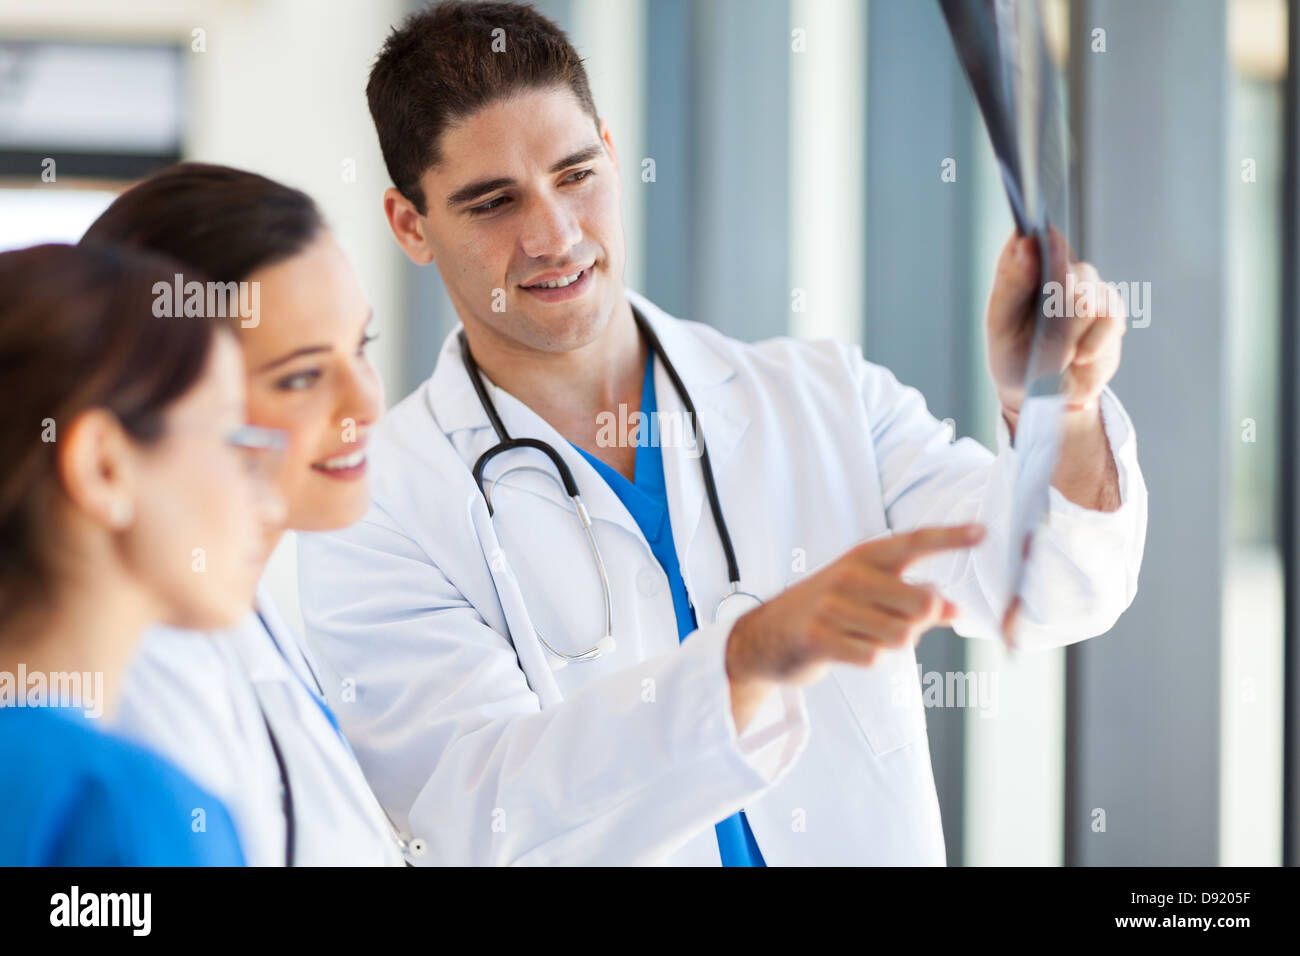 group of medical workers looking at patient's x-ray film Stock Photo